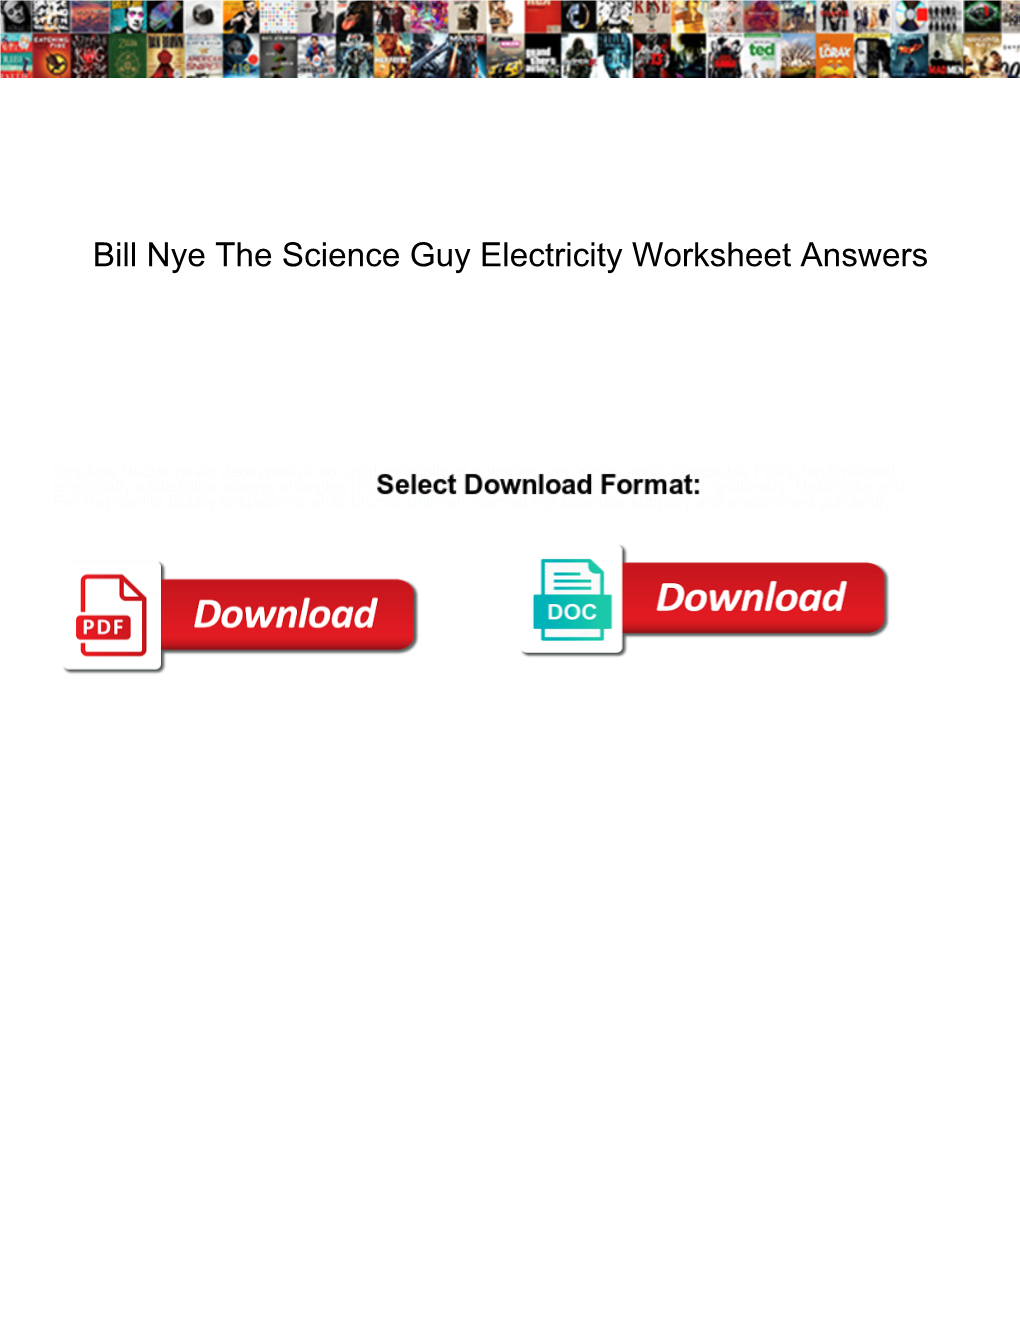 Bill Nye the Science Guy Electricity Worksheet Answers